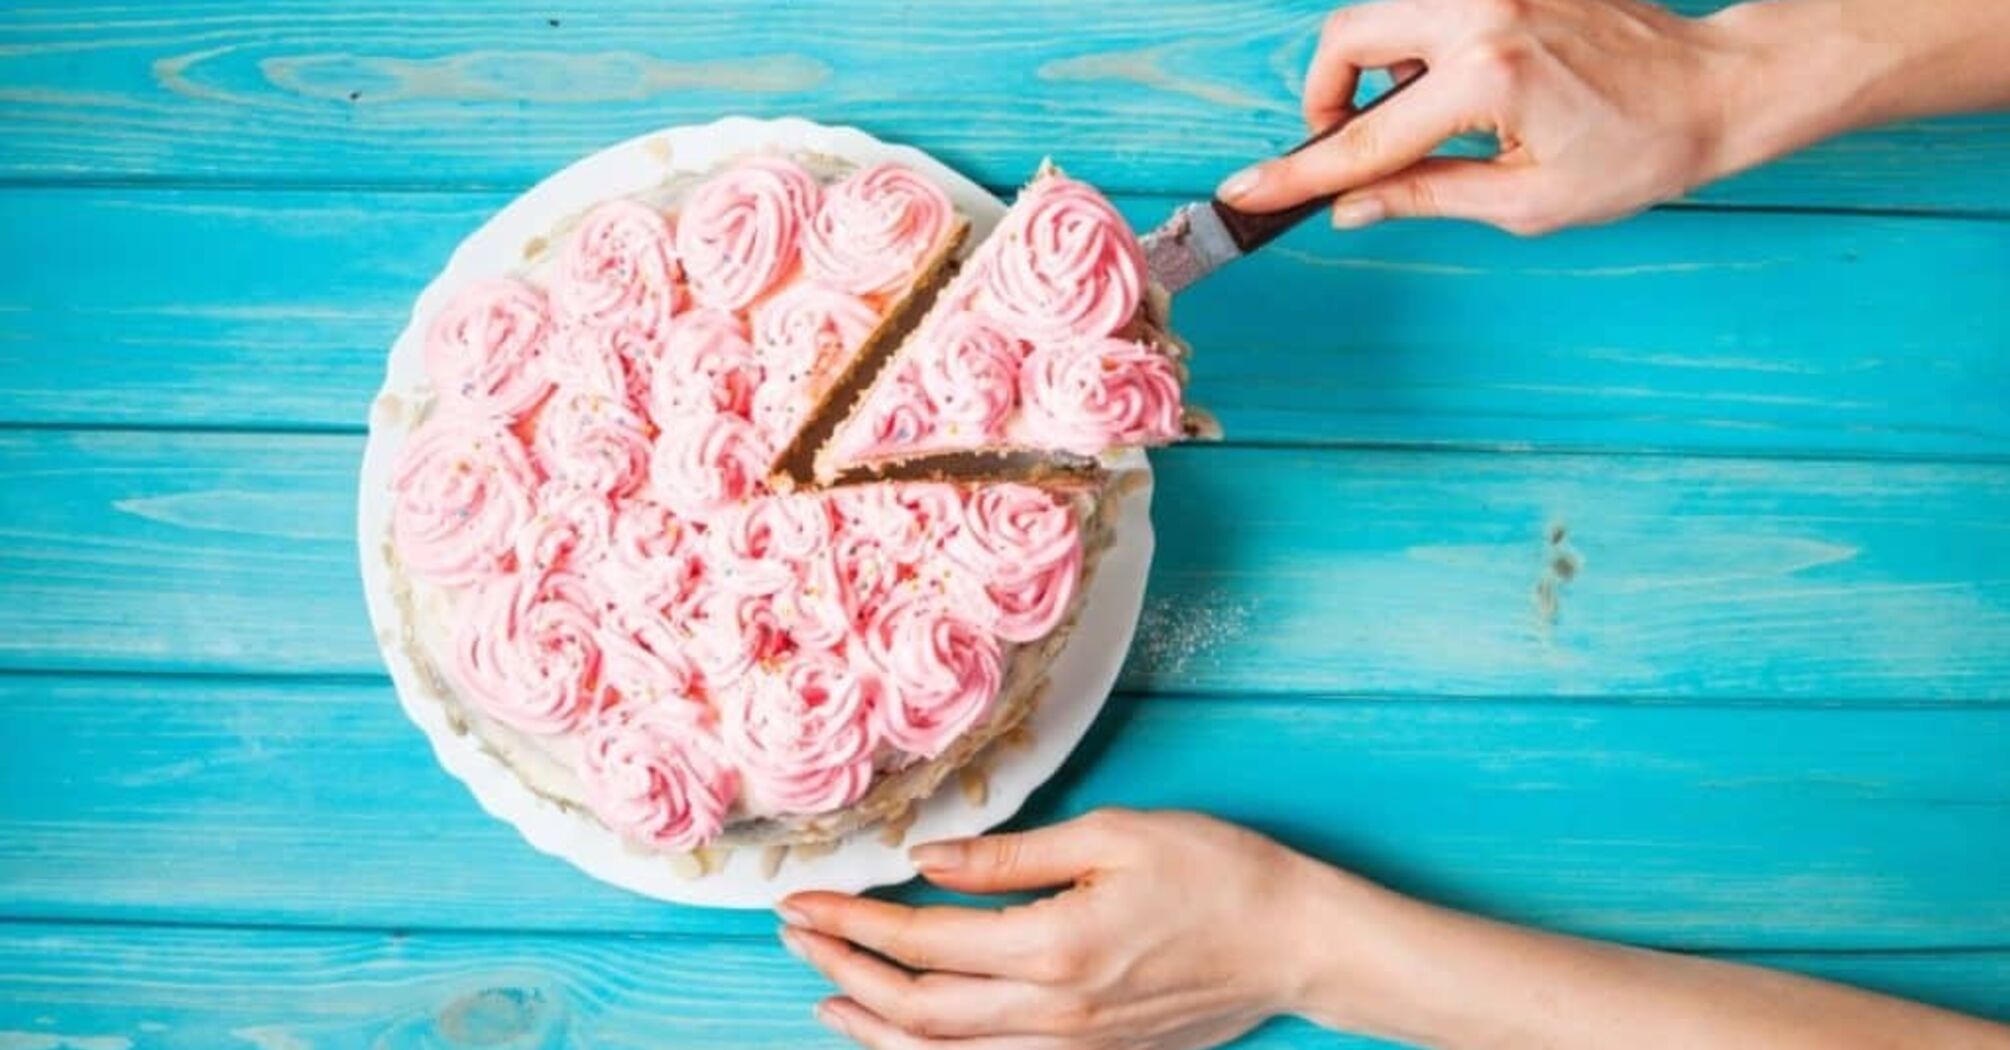 Get 32 slices from any cake with this clever baking hack